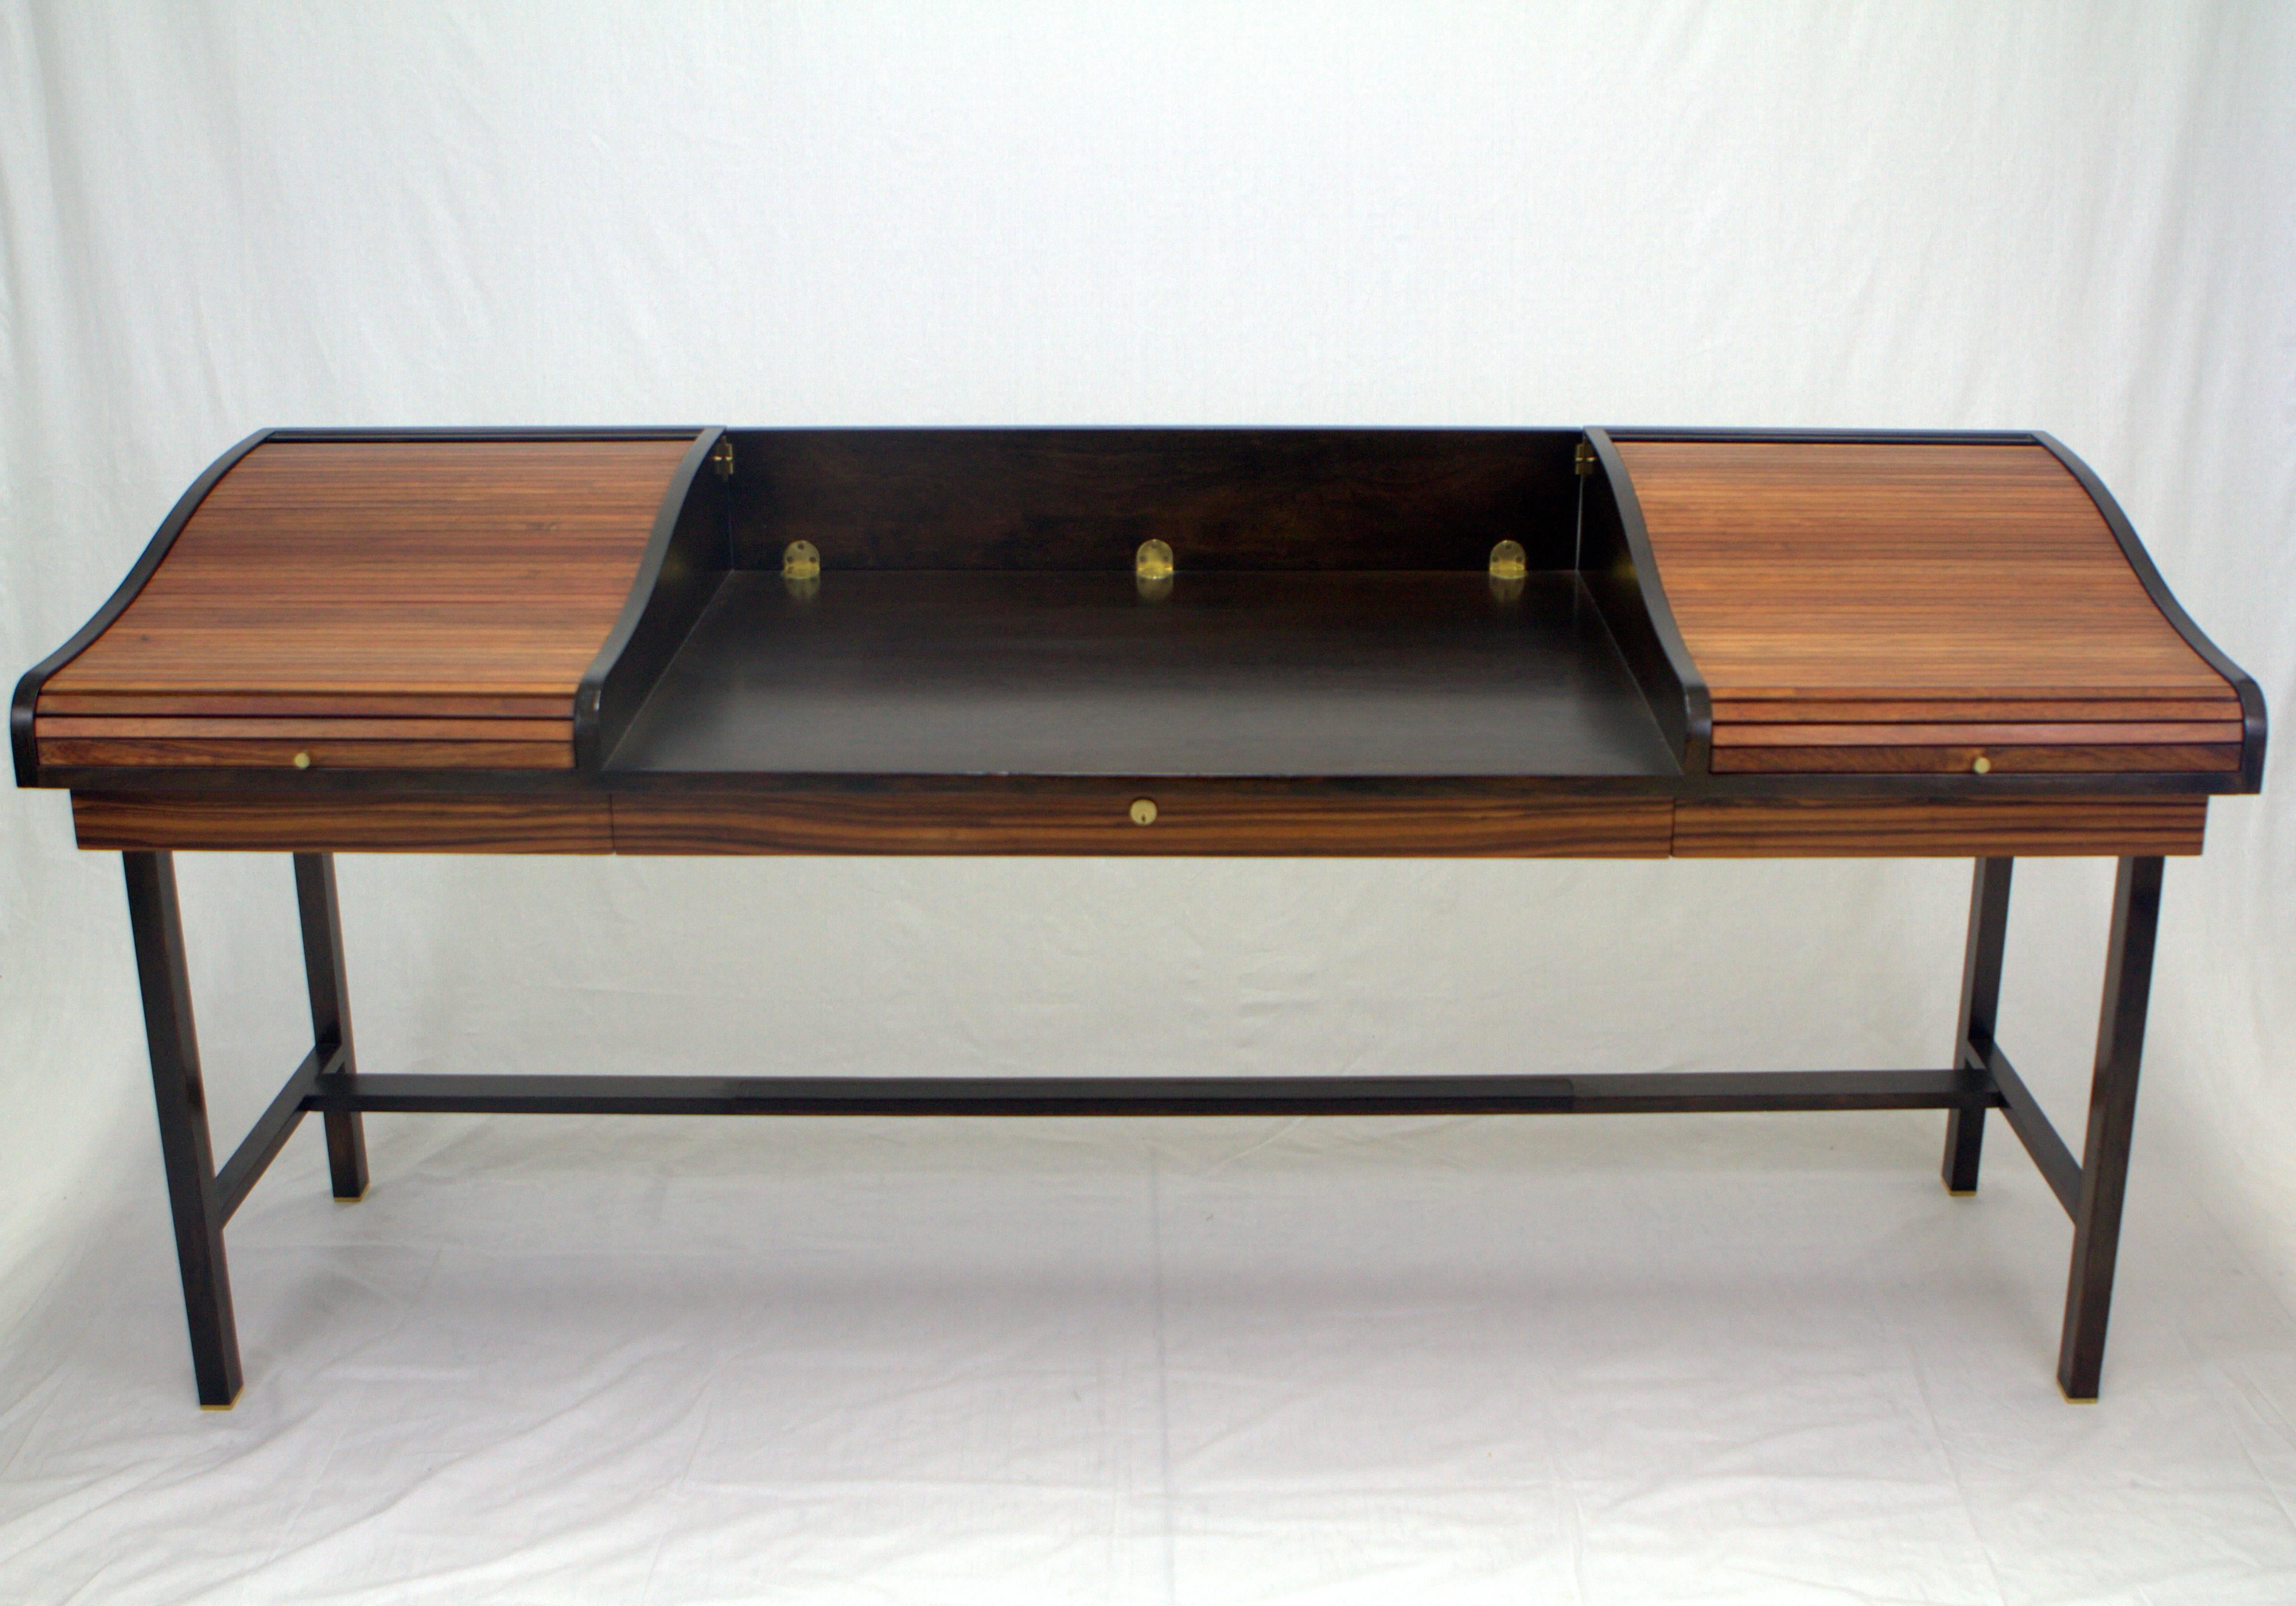 Elegant mahogany and rosewood double roll-top partners desk by Edward Wormley for Dunbar. Two roll-tops open to conceal small drawers on the left and an open space on the right, these flank a hinged panel that drops allowing it to be used as a